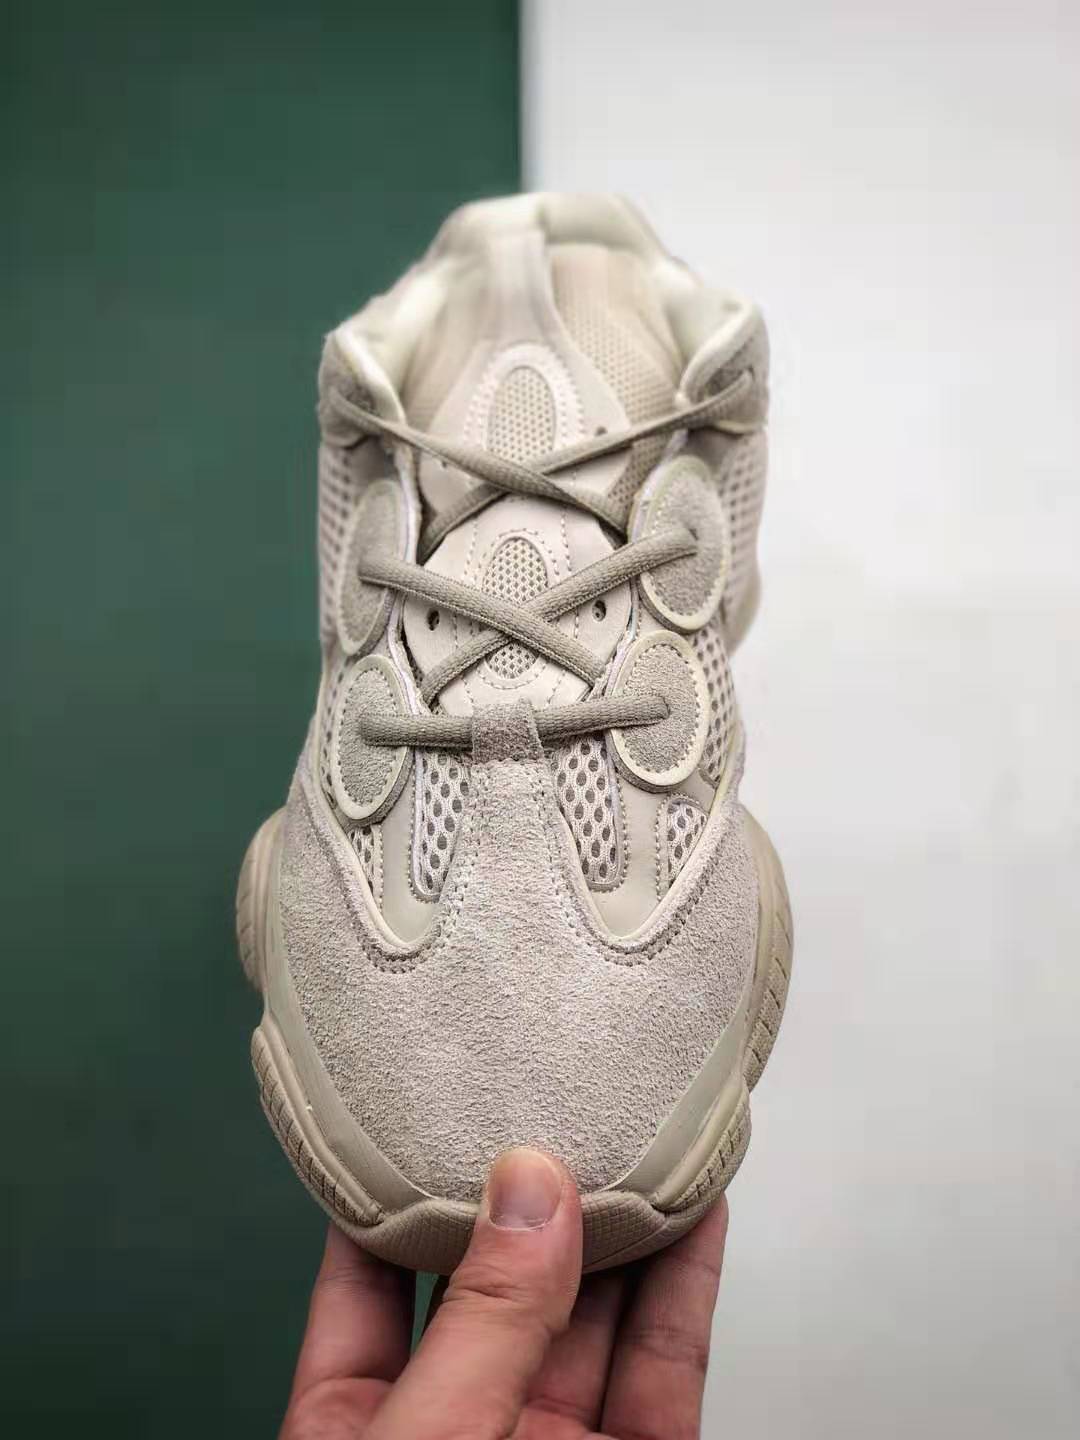 Adidas Yeezy 500 'Blush' DB2908 - Premium Sneakers for Style & Comfort